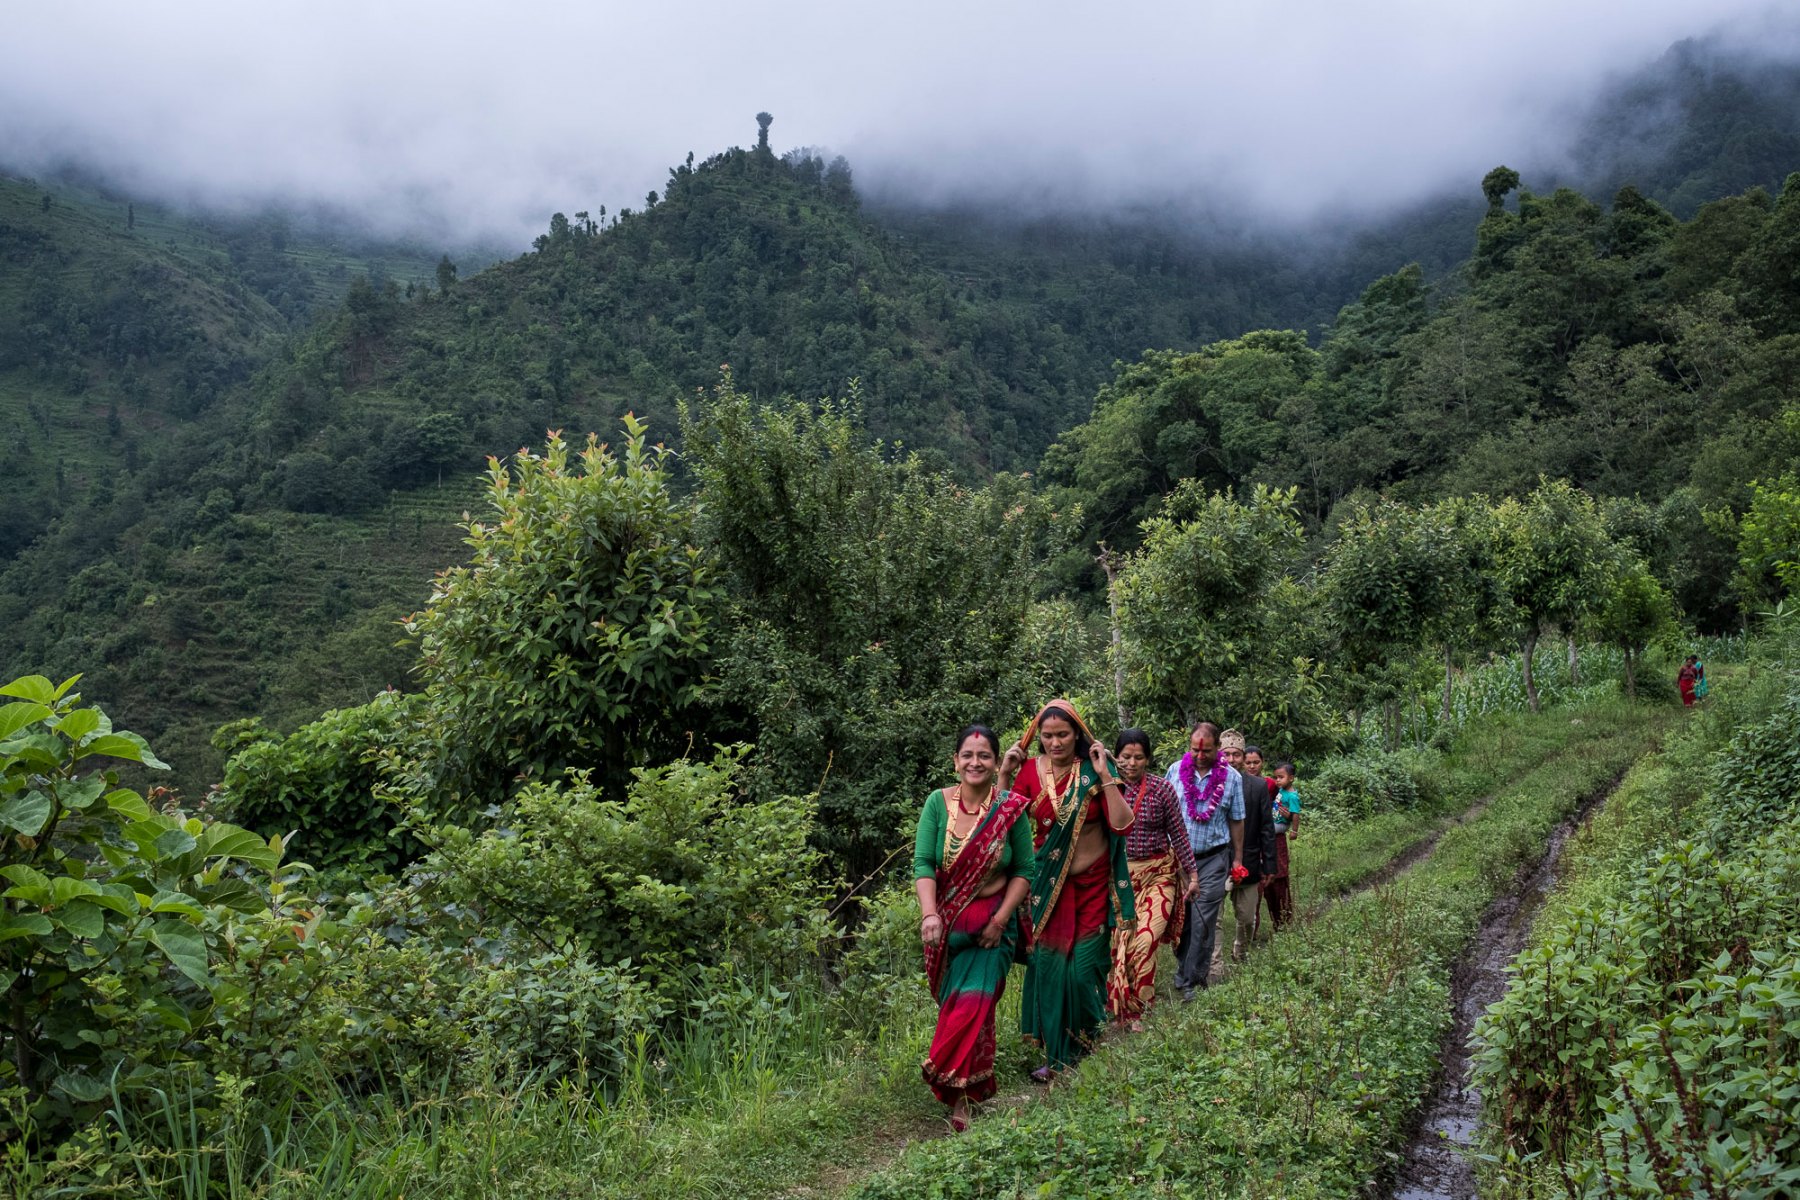 Female farmers from the Chaubas Community Forest Users Group walk out of  the Khola community forest. Sushila Kumar (not pictured) is chairwoman of the Chaubas Community Forest Users Group. The groups of women are highly engaged in the silvicultural management of community forests and have been farming cardamom in Fagar Khola community forest for the past two years. Cardamom is a high value crop that requires little maintenance once it's been planted and leads to additional income for the female farmers.